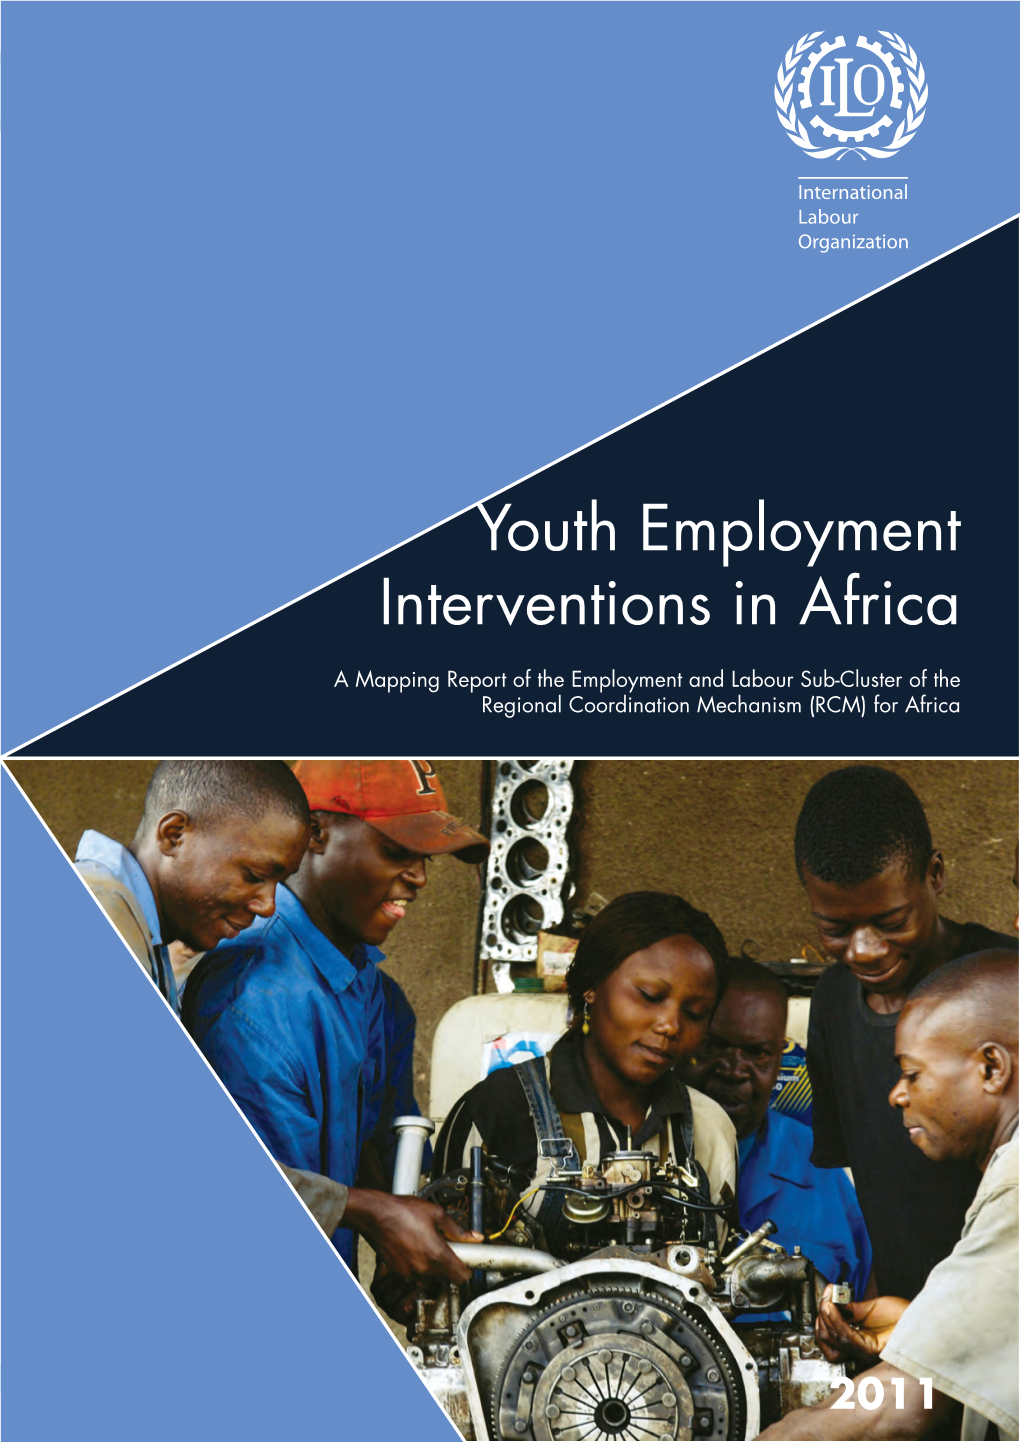 Youth Employment Interventions in Africa